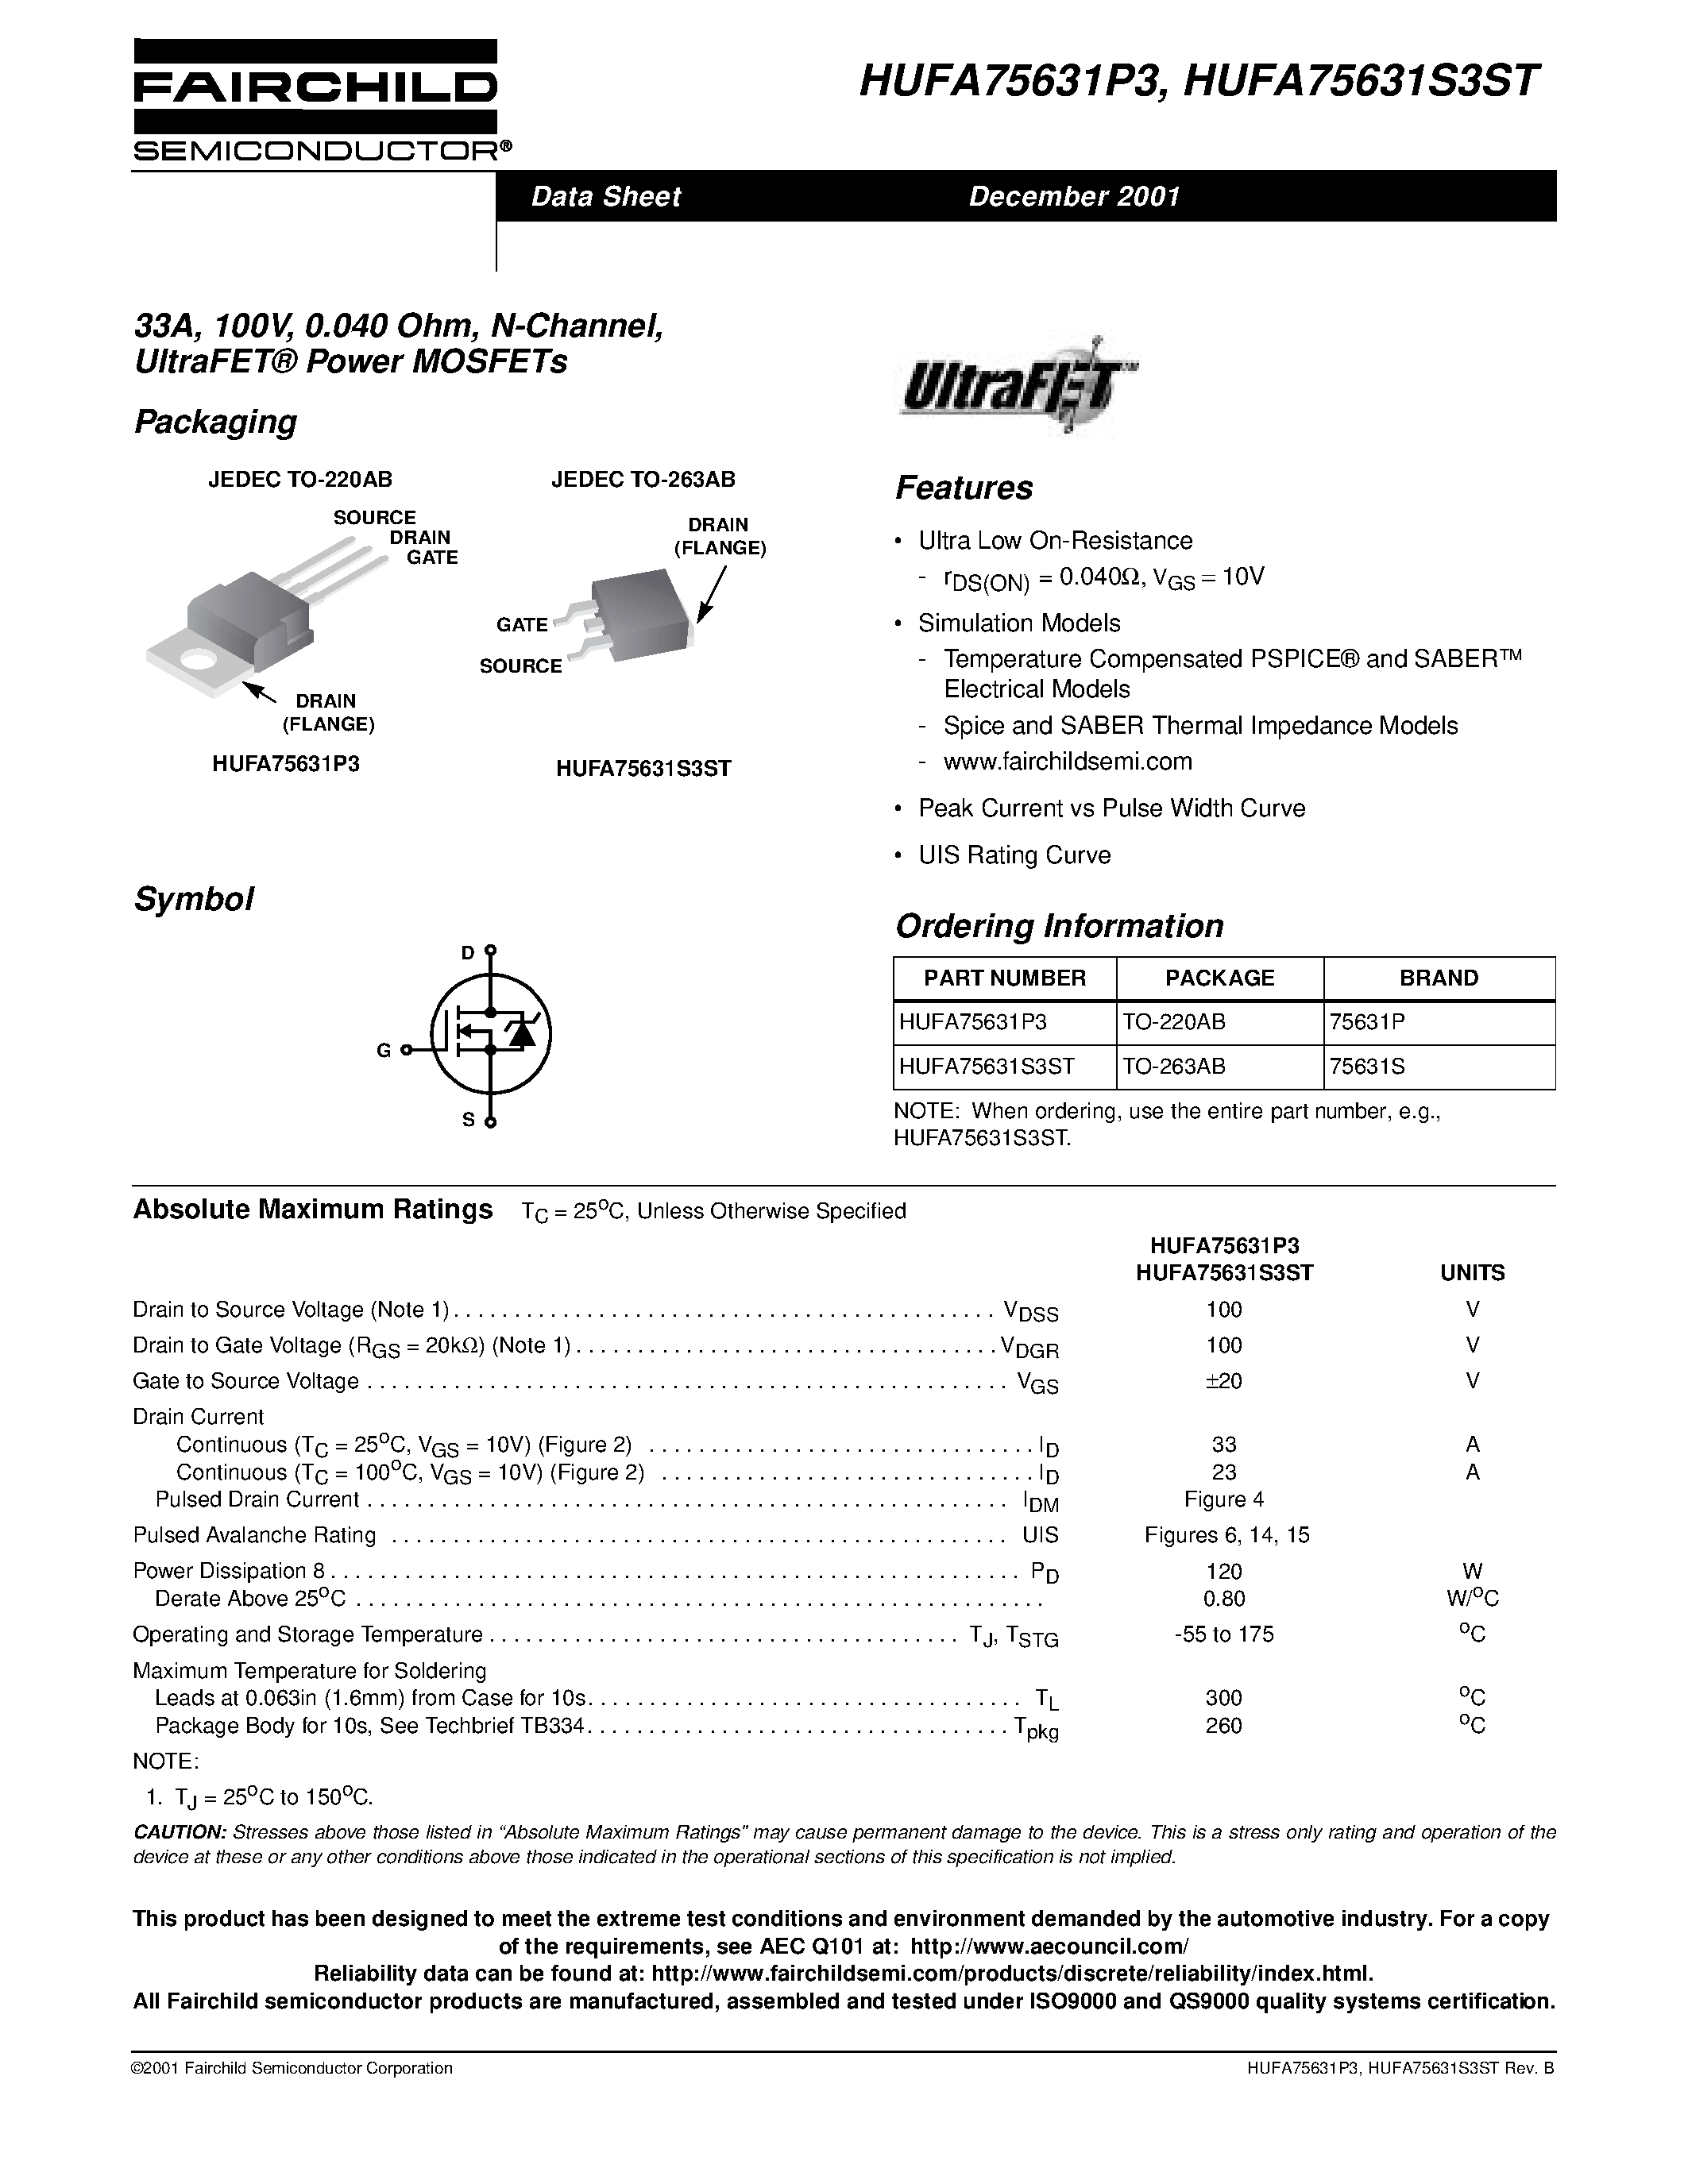 Datasheet HUFA75631P3 - 33A/ 100V/ 0.040 Ohm/ N-Channel/ UltraFET Power MOSFETs page 1